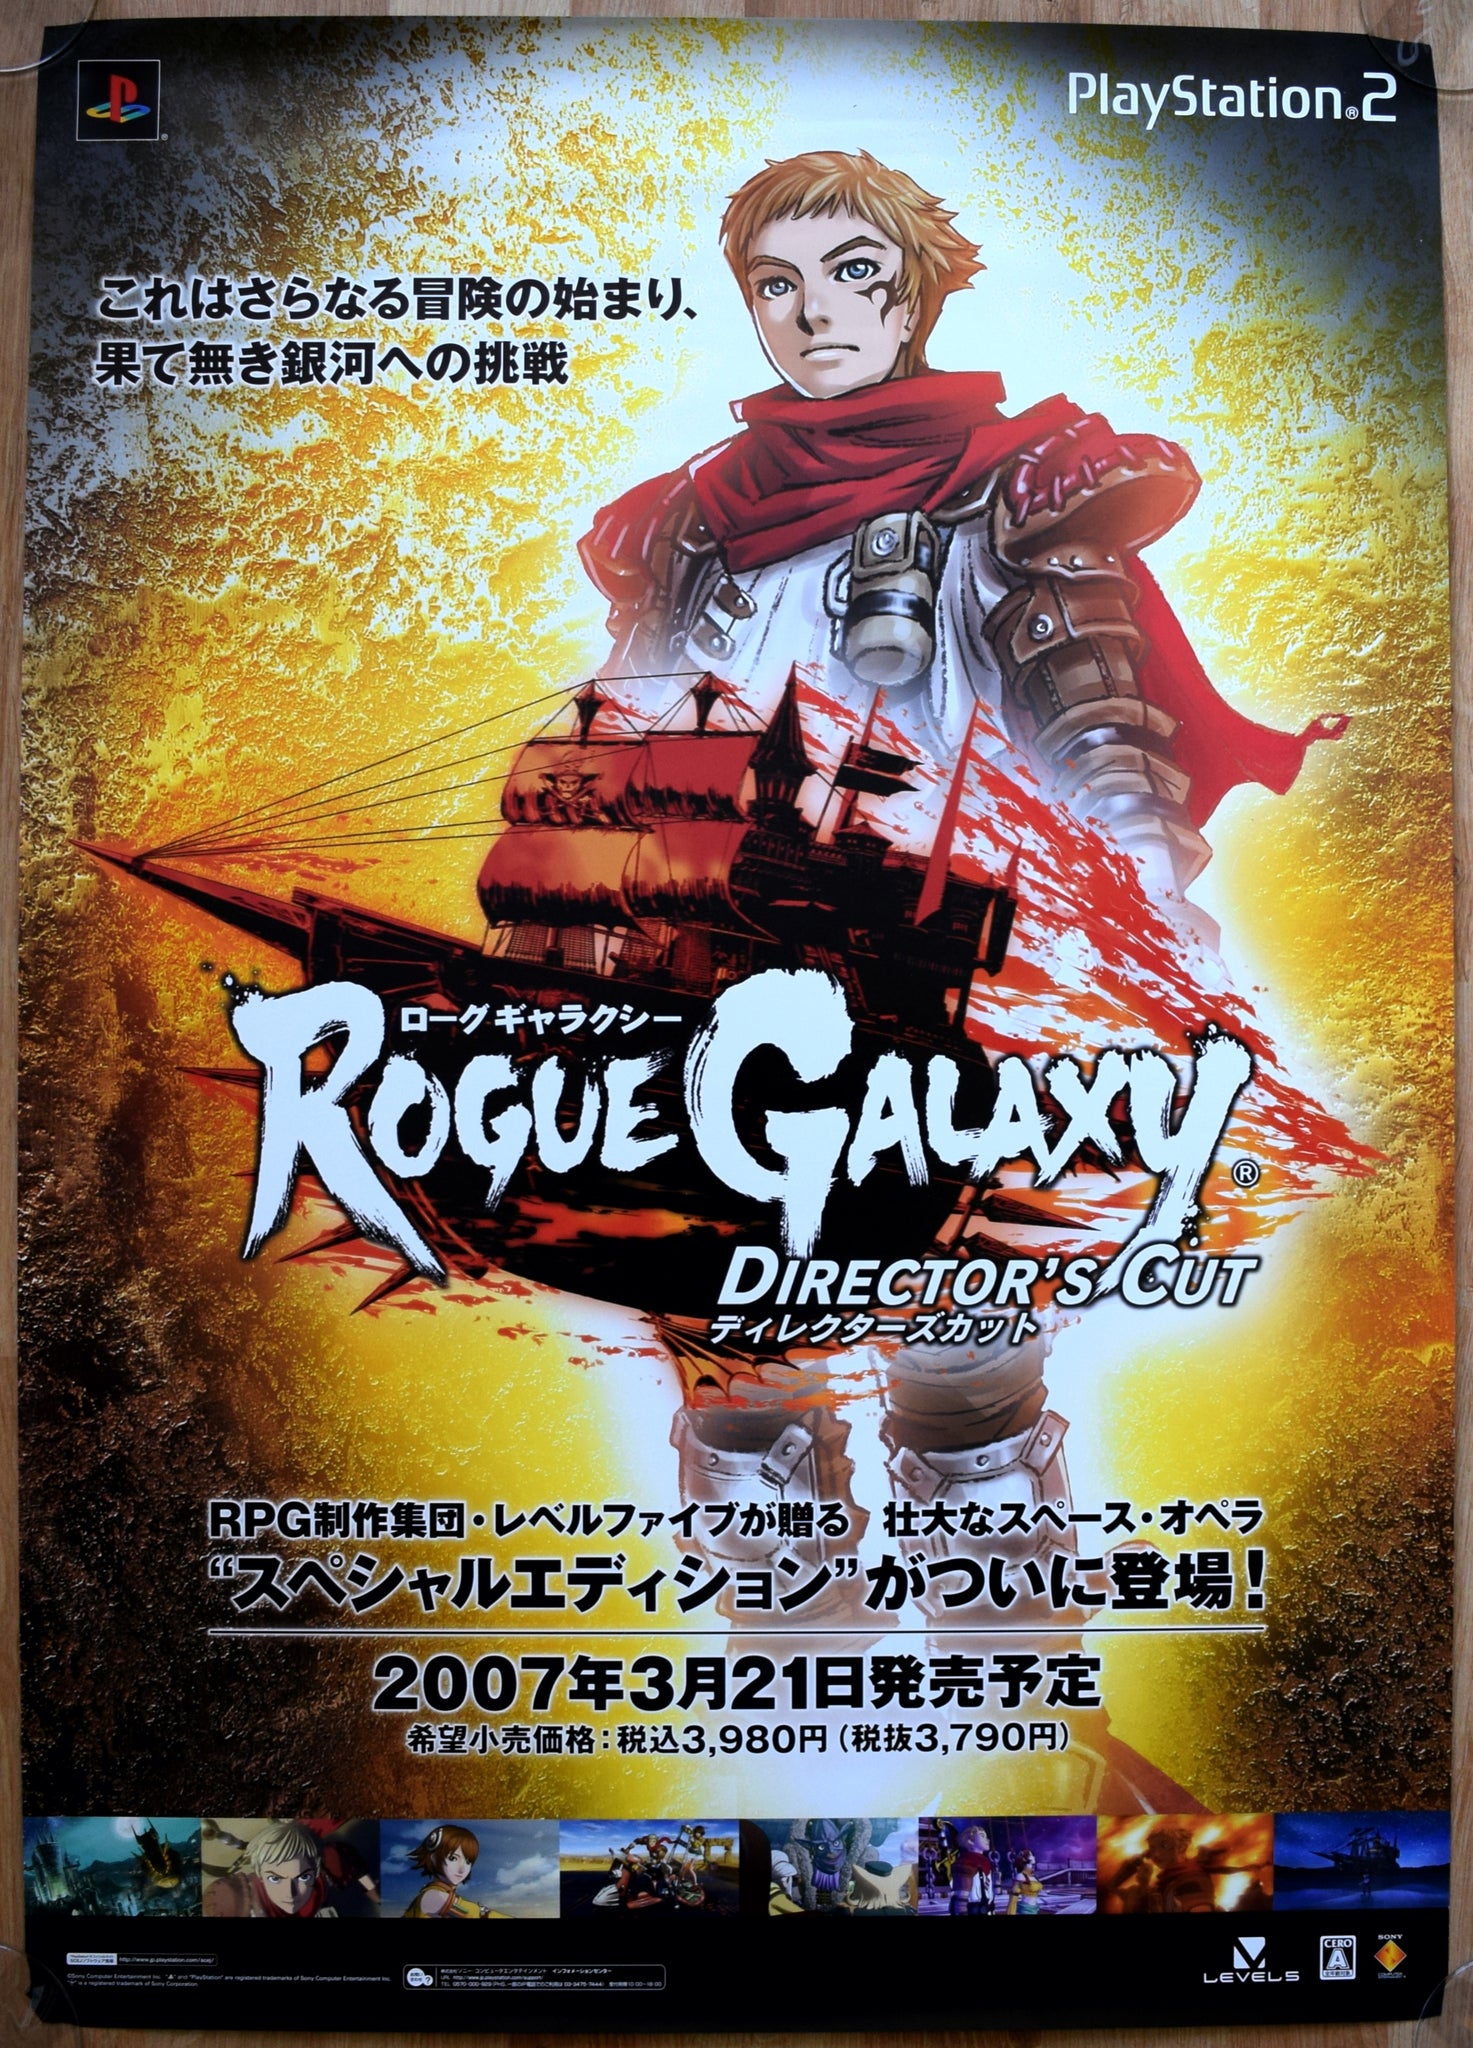 Rogue Galaxy: Director's Cut (B2) Japanese Promotional Poster